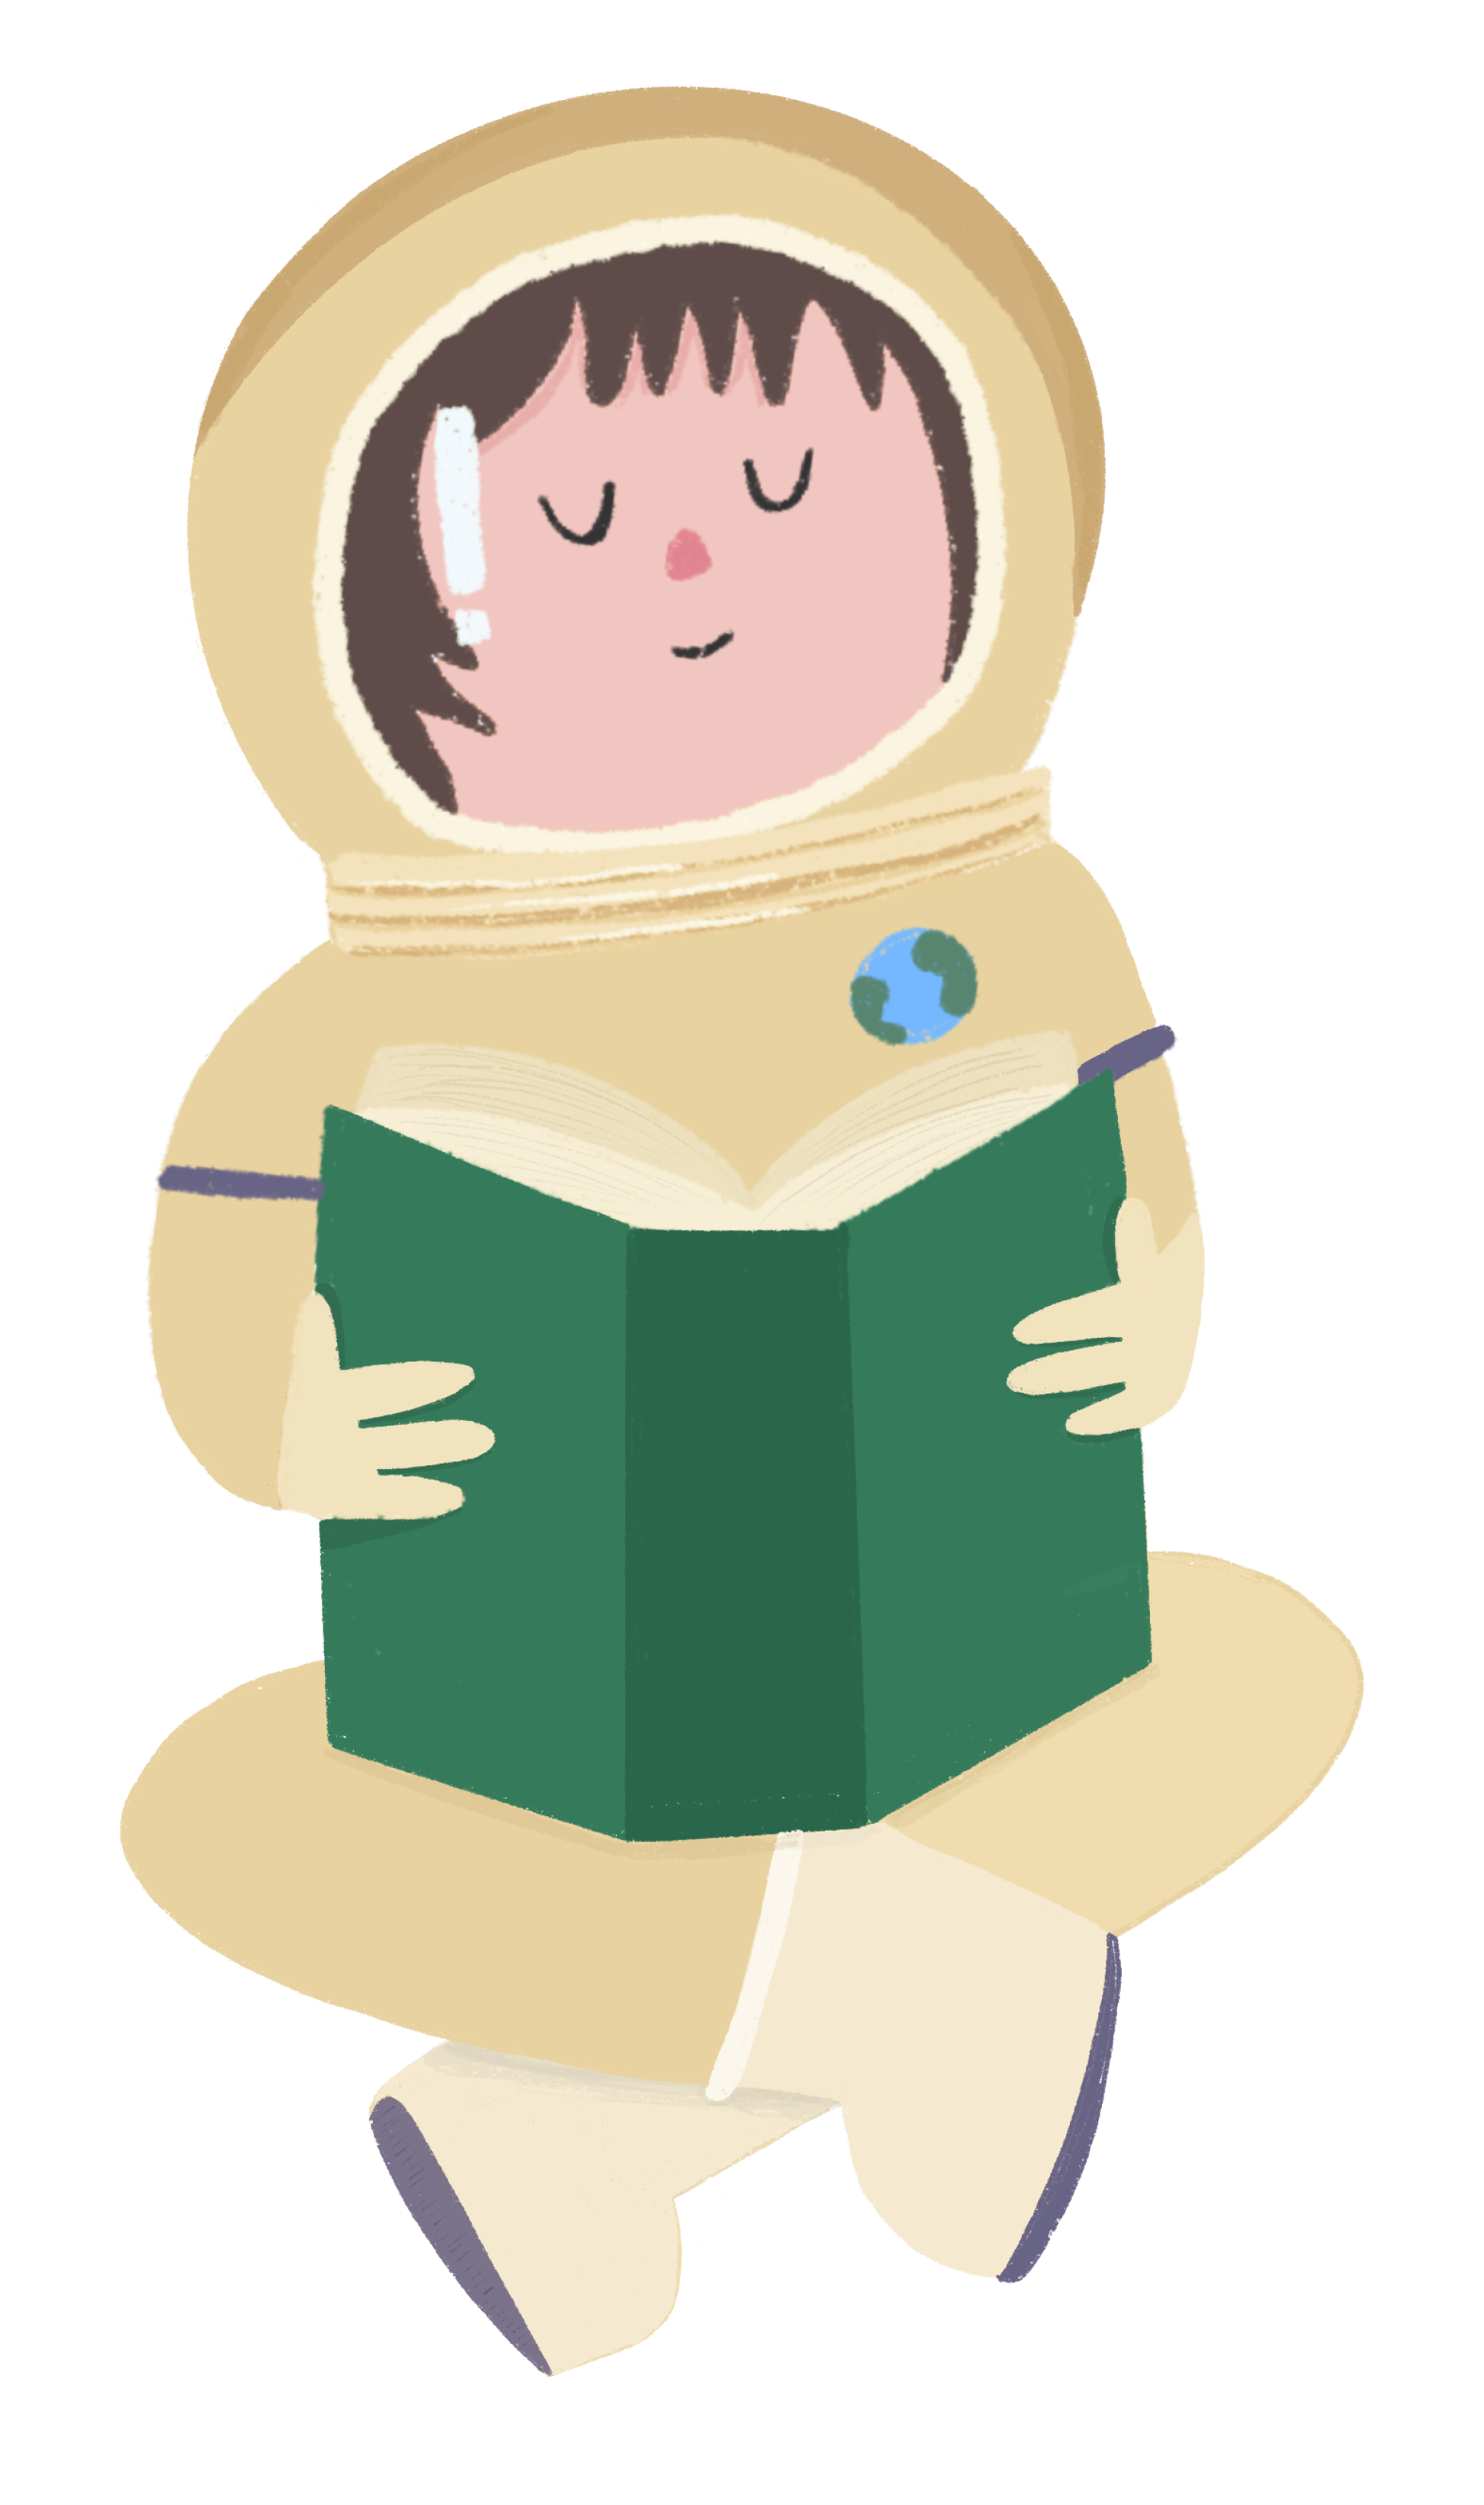 Astronaut-reading.png